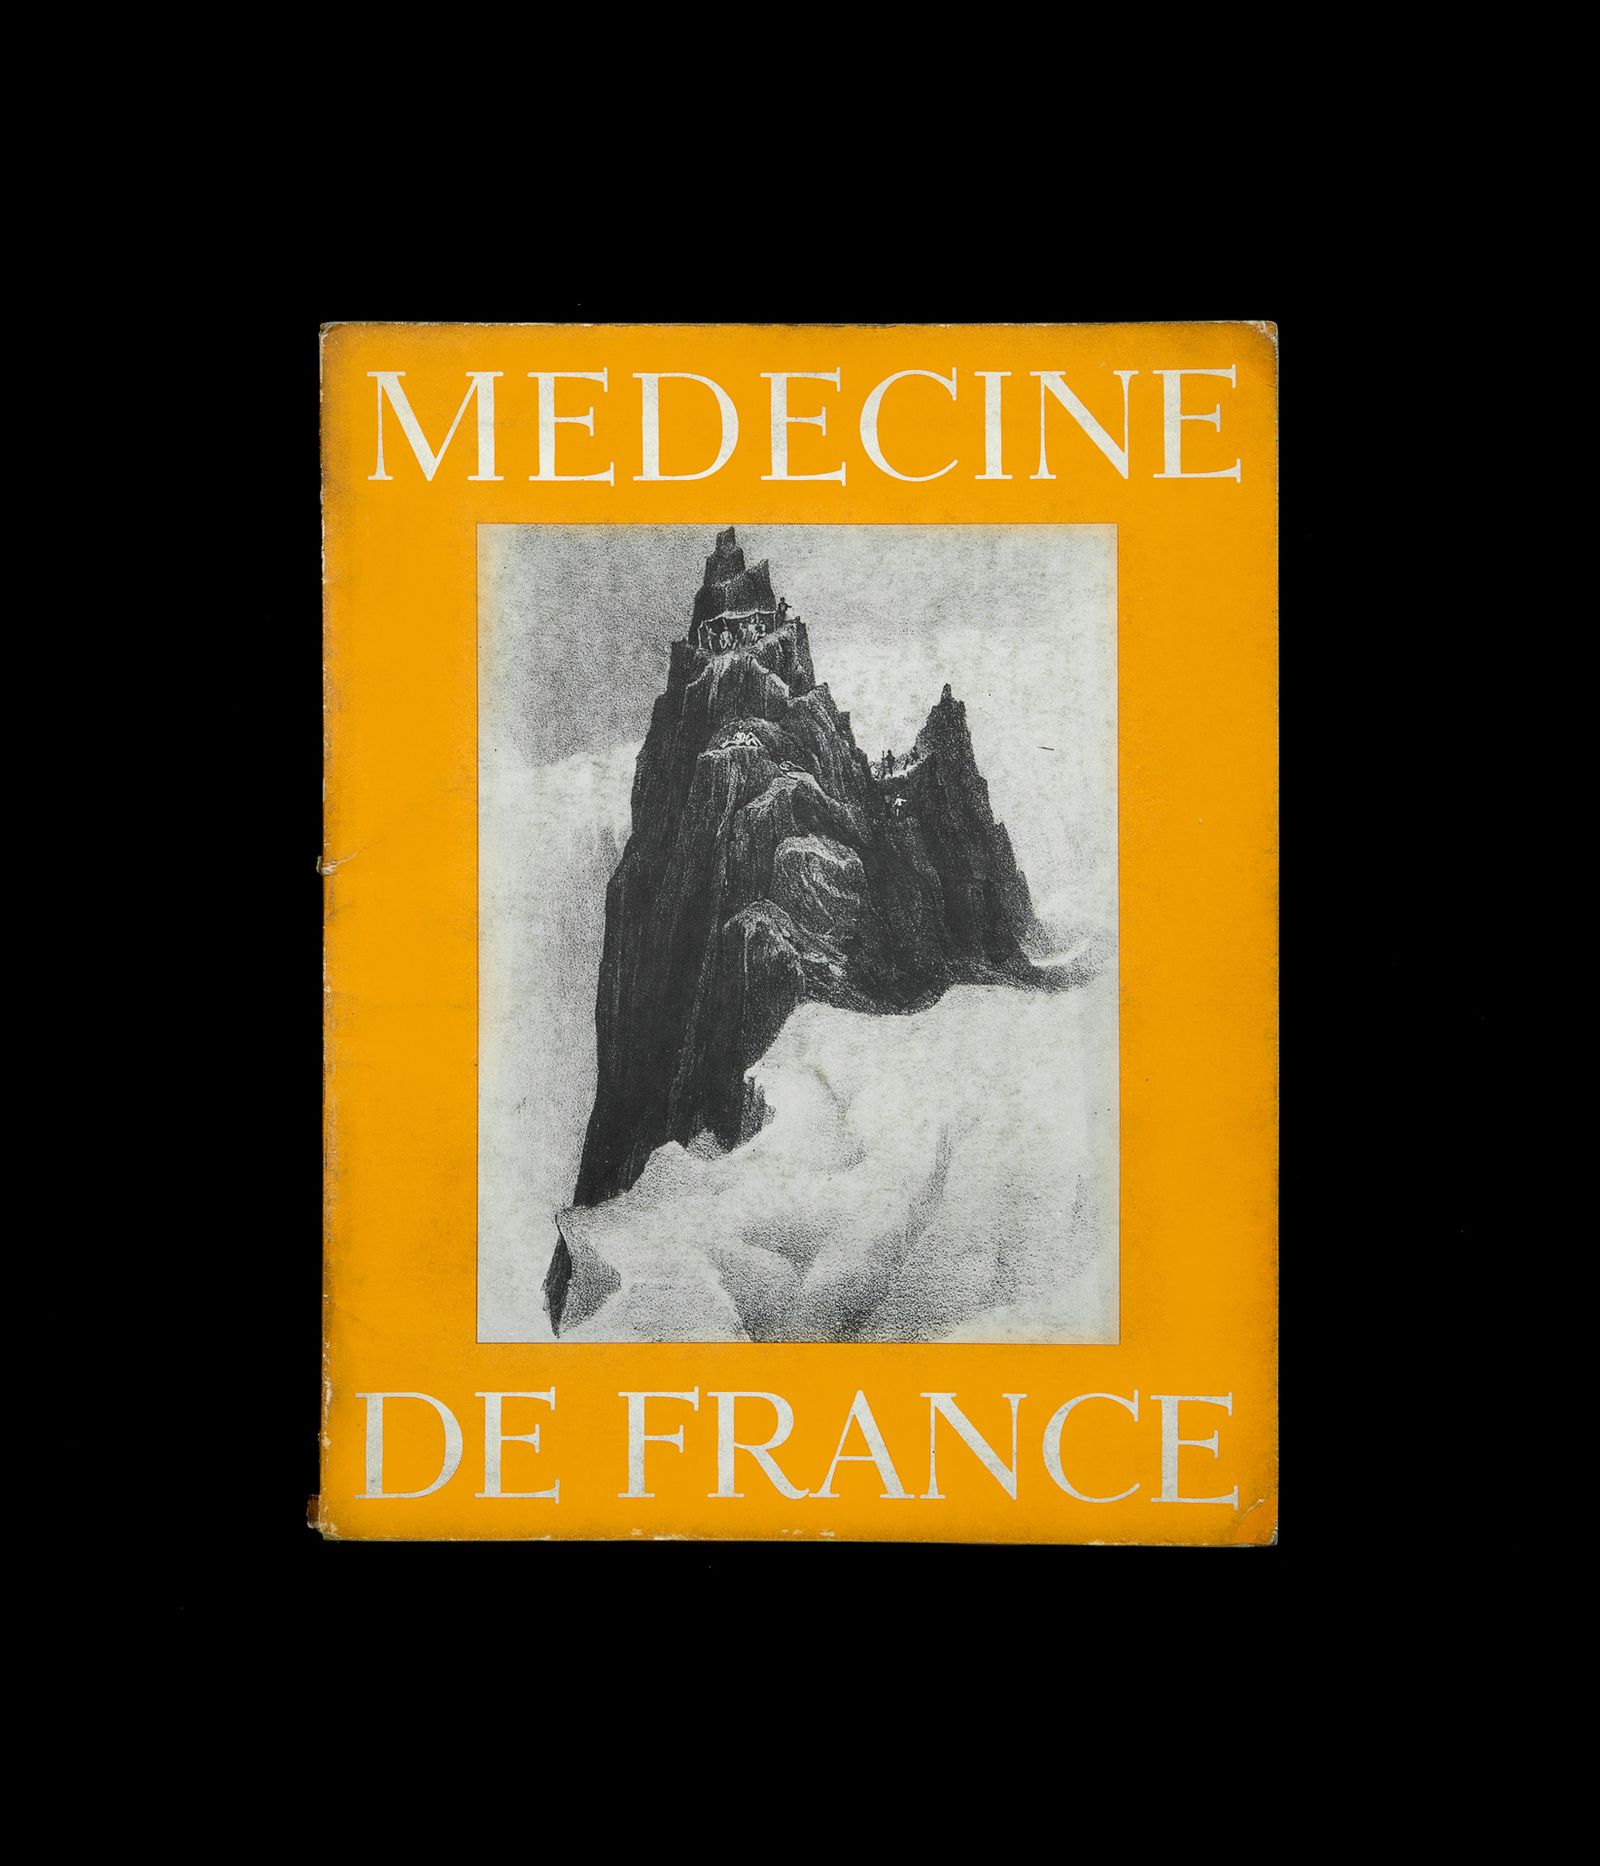 © Lihuel González - To listen to this audio book click on this link : https://archive.org/details/False_friends/medicine+france.mp3